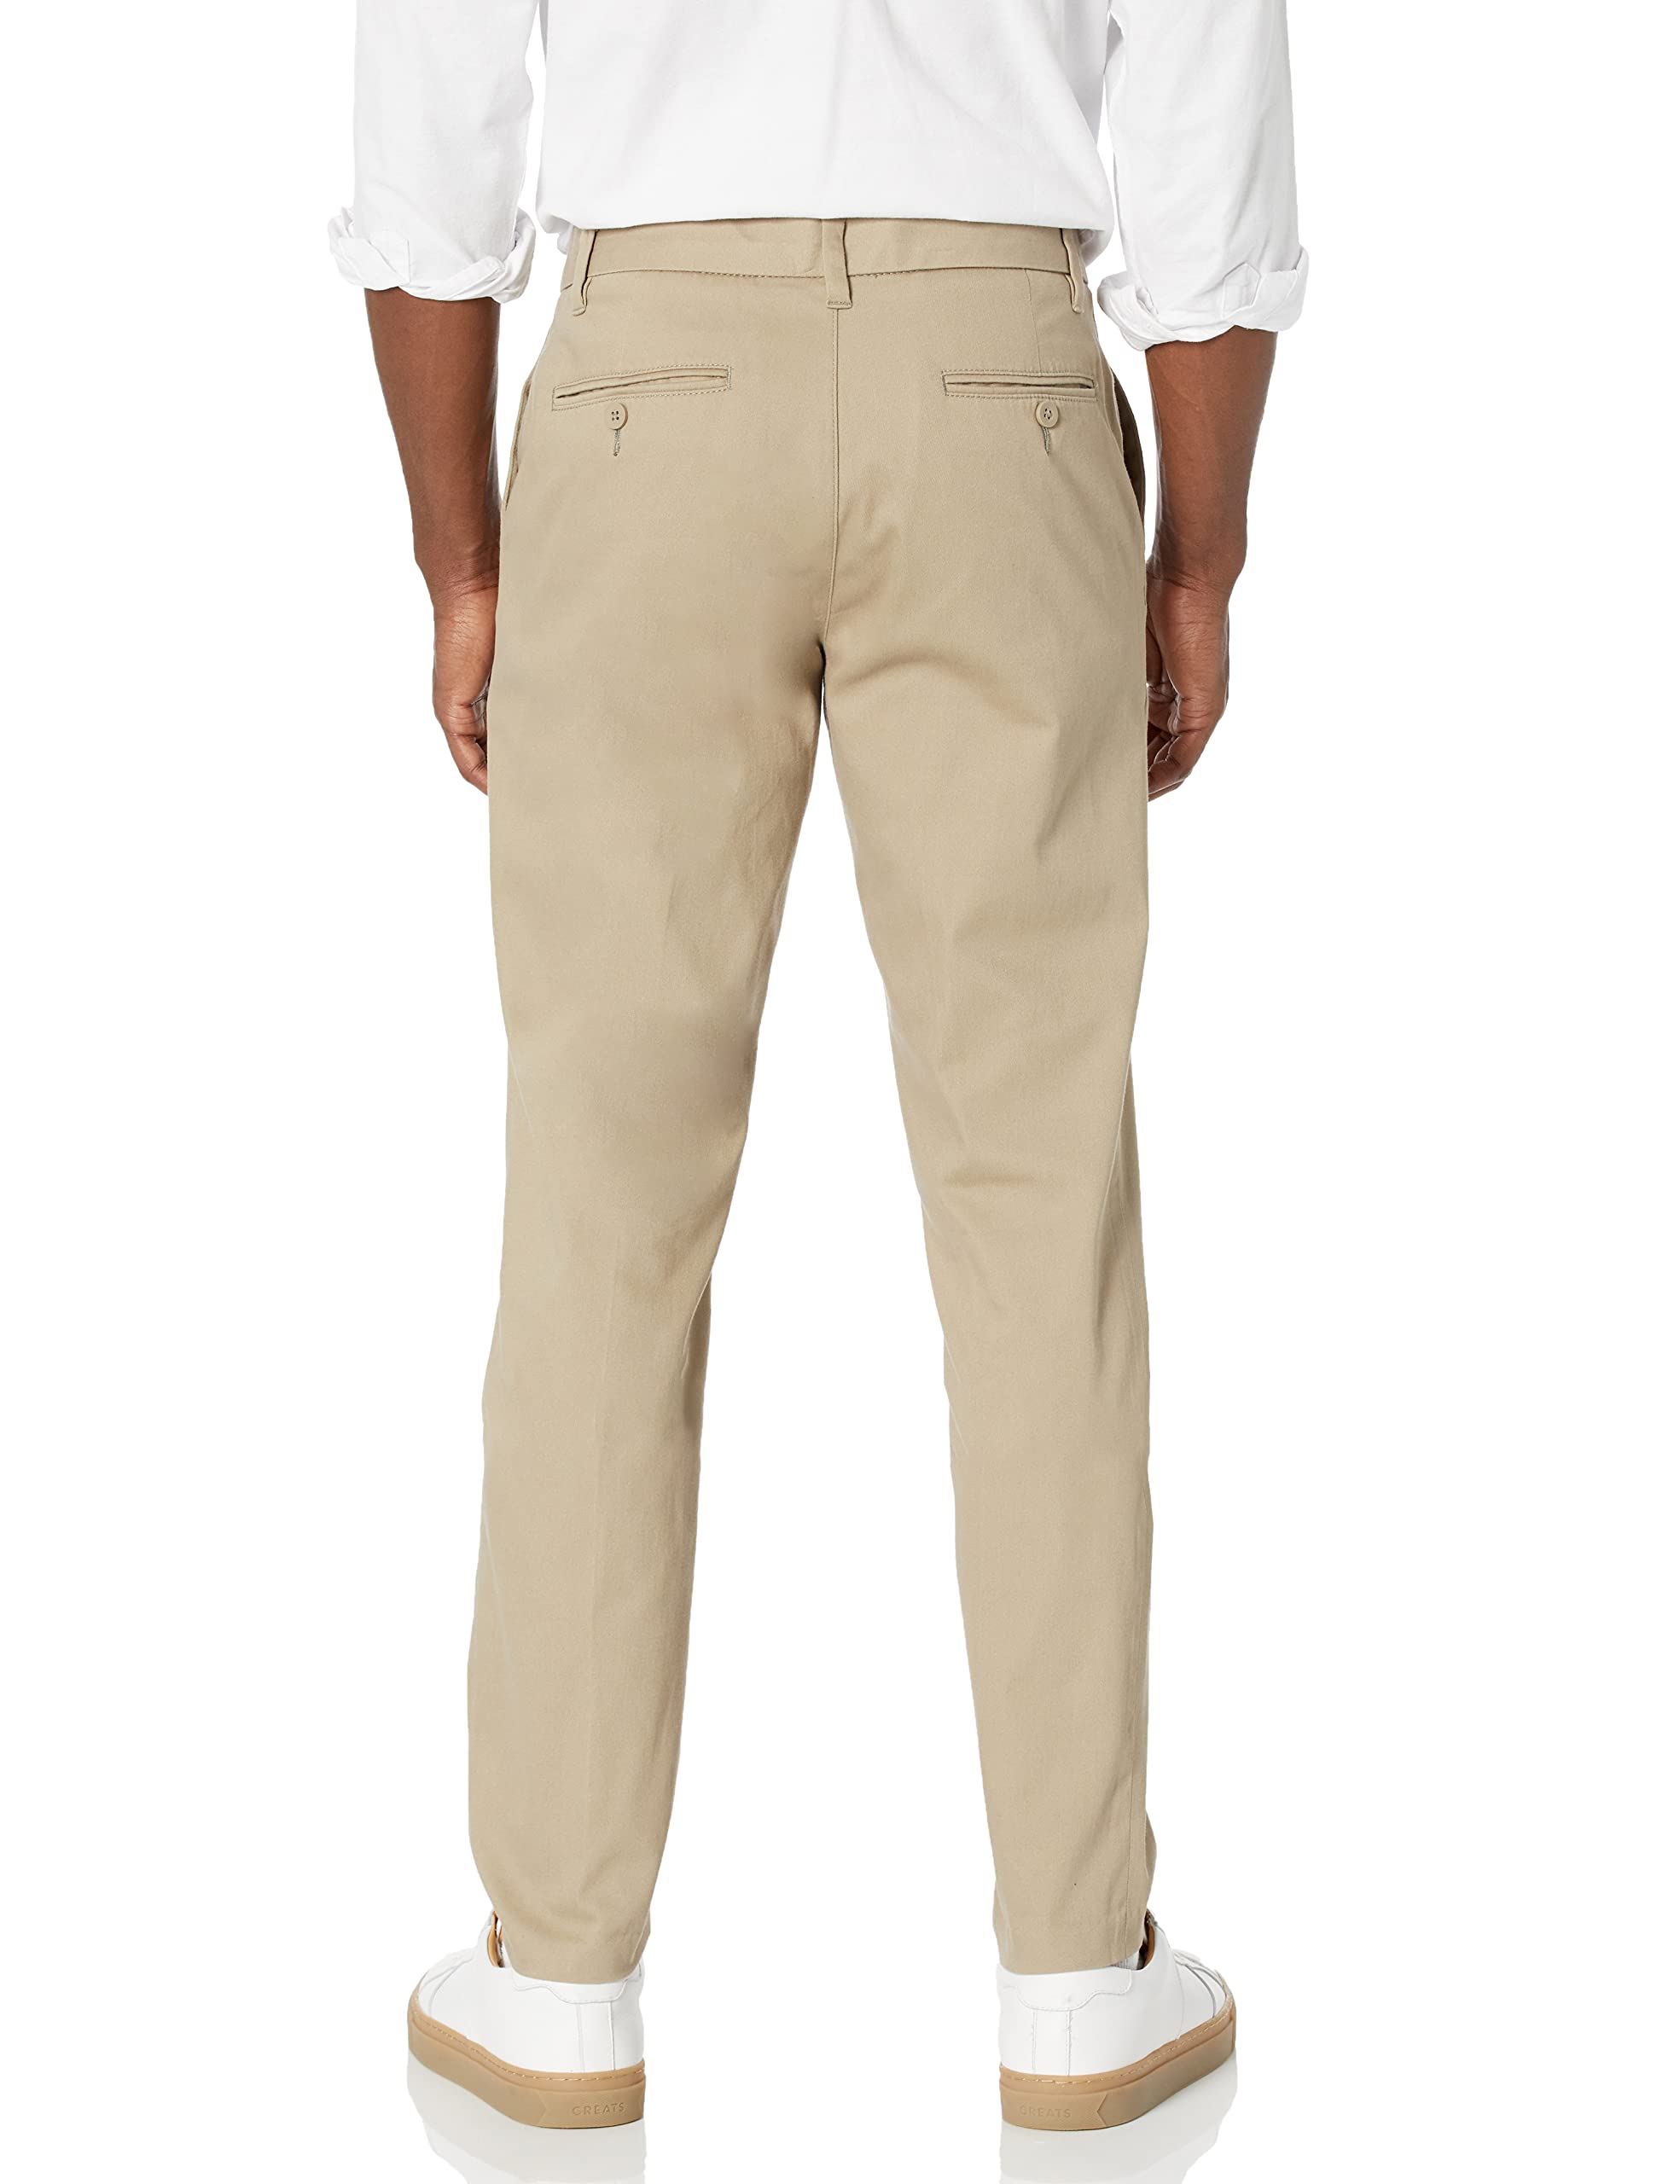 Amazon Essentials Men's Slim-Fit Wrinkle-Resistant Flat-Front Stretch Chino Pant